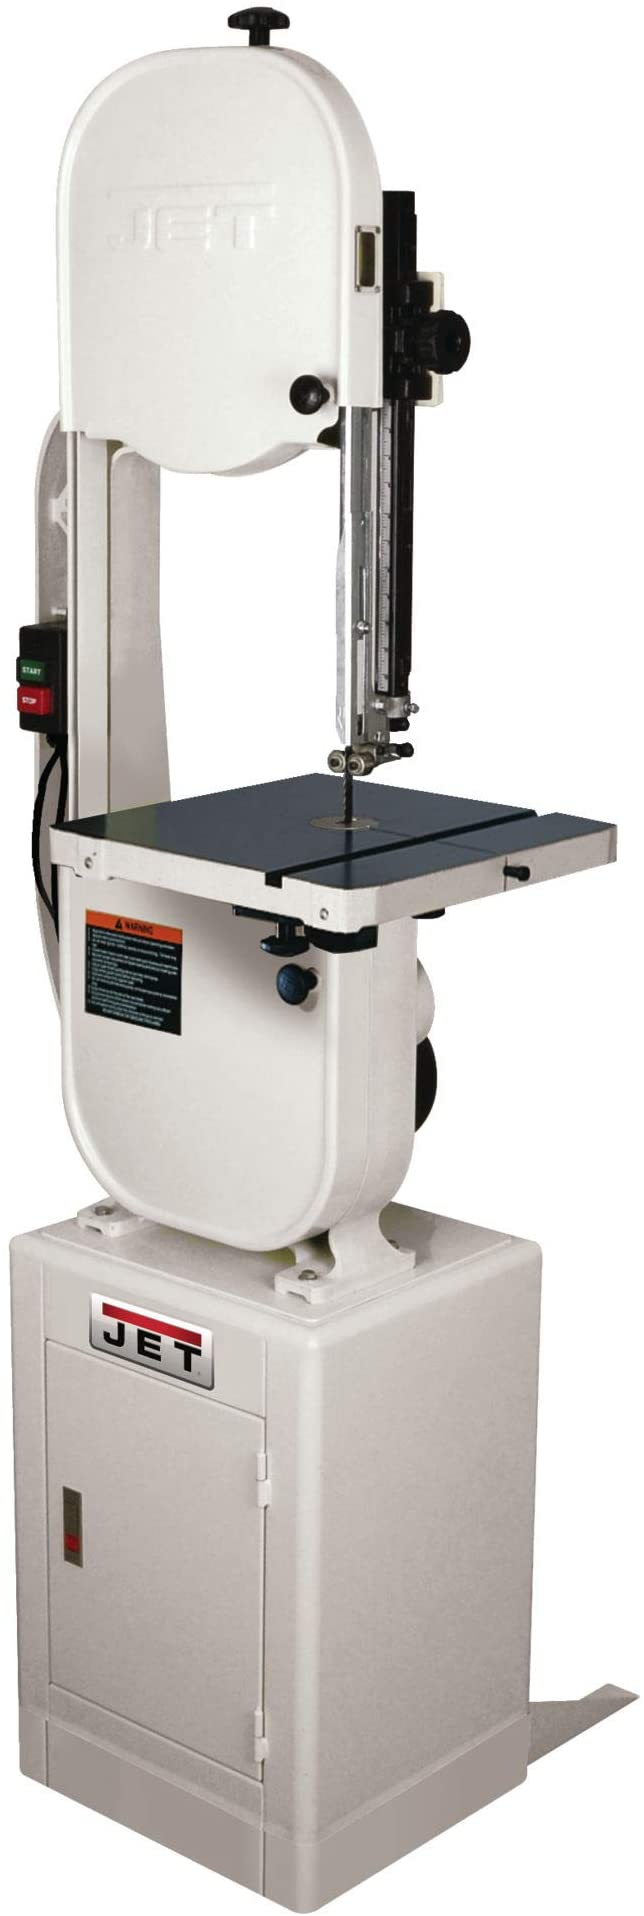 JET JWBS-14DXPRO 14-Inch Deluxe Pro Band Saw Kit